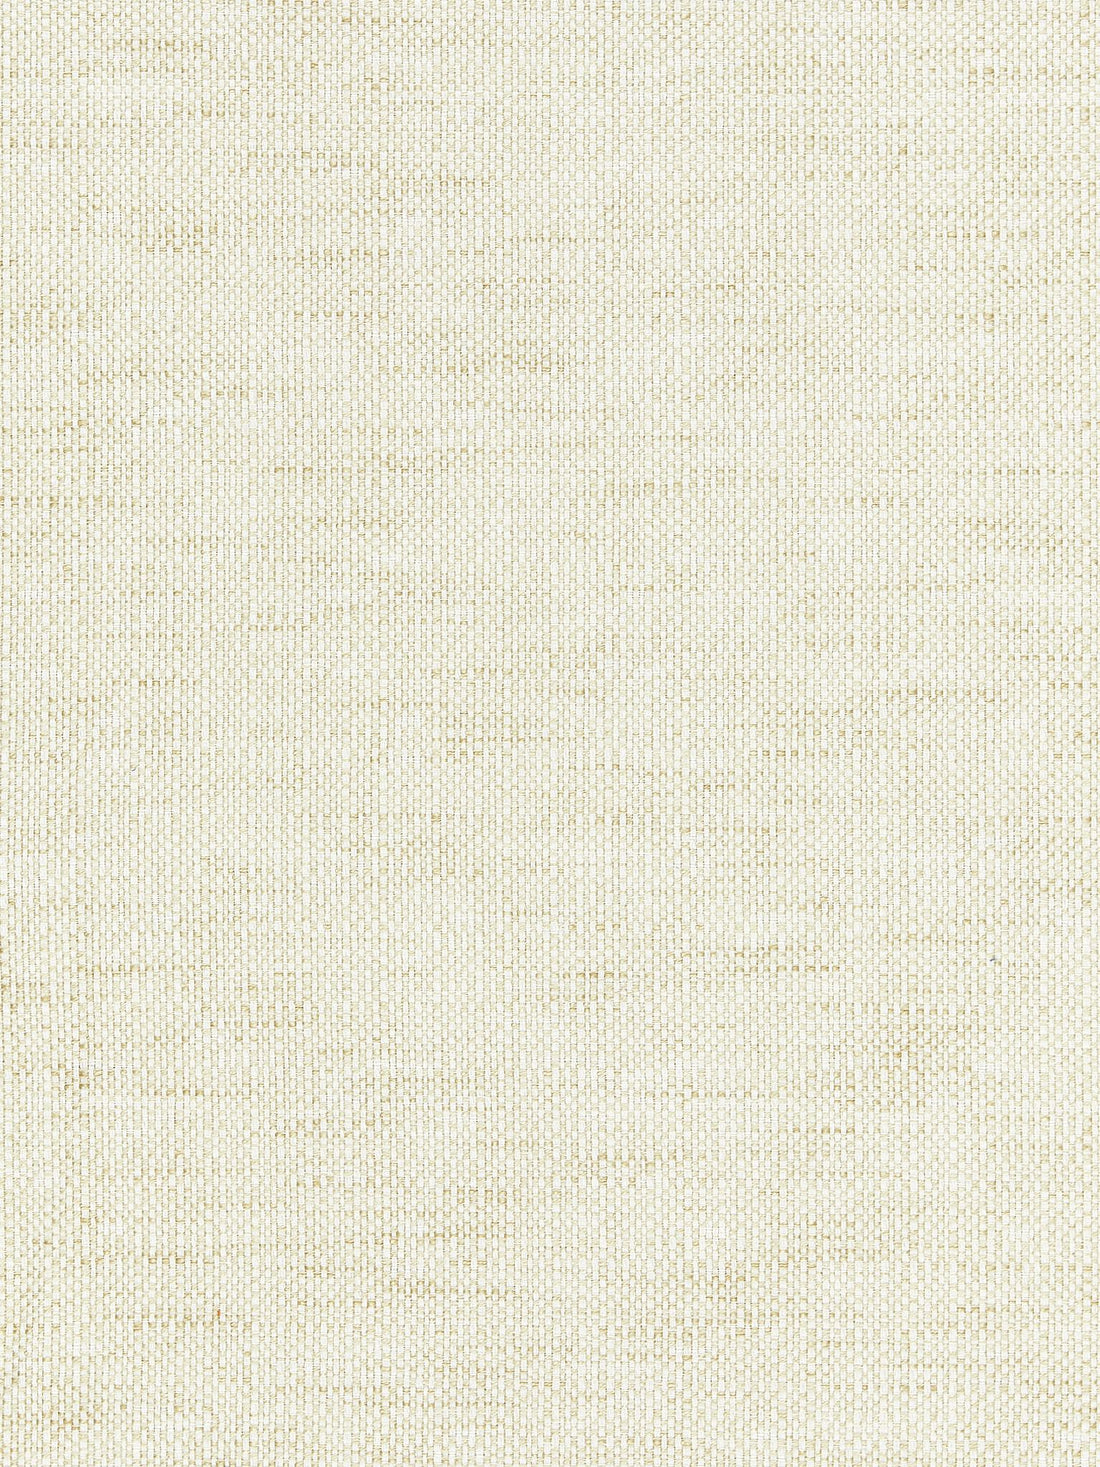 Chester Weave fabric in flax color - pattern number BK 0001K65118 - by Scalamandre in the Old World Weavers collection